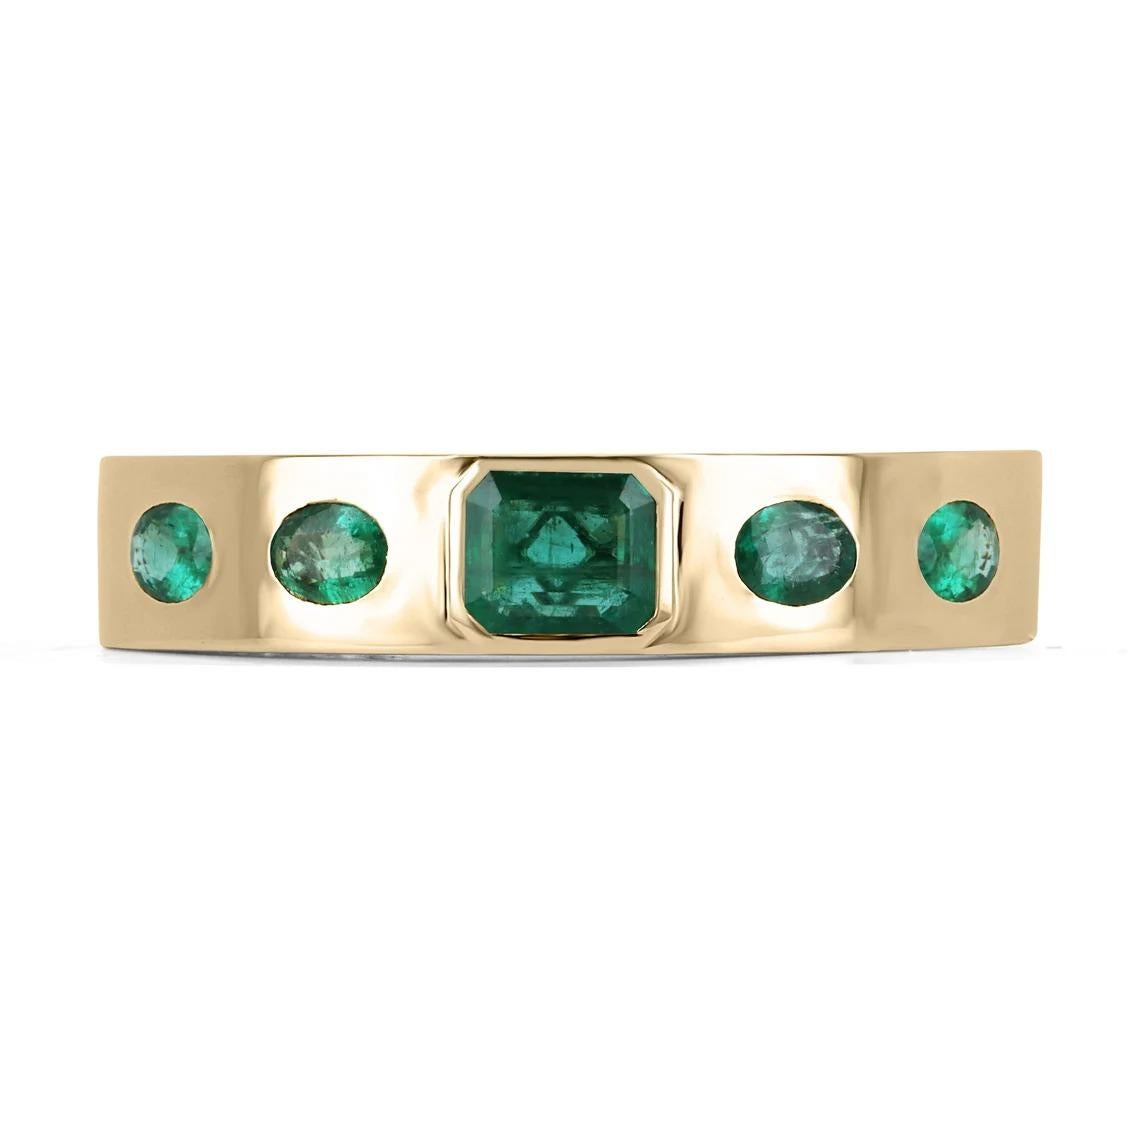 Wrist Diameter: 6.5-7 inches

Setting Style: Bezel
Setting Material: 18K Yellow Gold
Setting Weight: 33.3 Grams

Main Stone: Emerald
Shape: Emerald, Oval Cut
Weight: 16.46-Carats (Total)
Clarity: Semi-Transparent
Color: Lush Green
Luster: Very